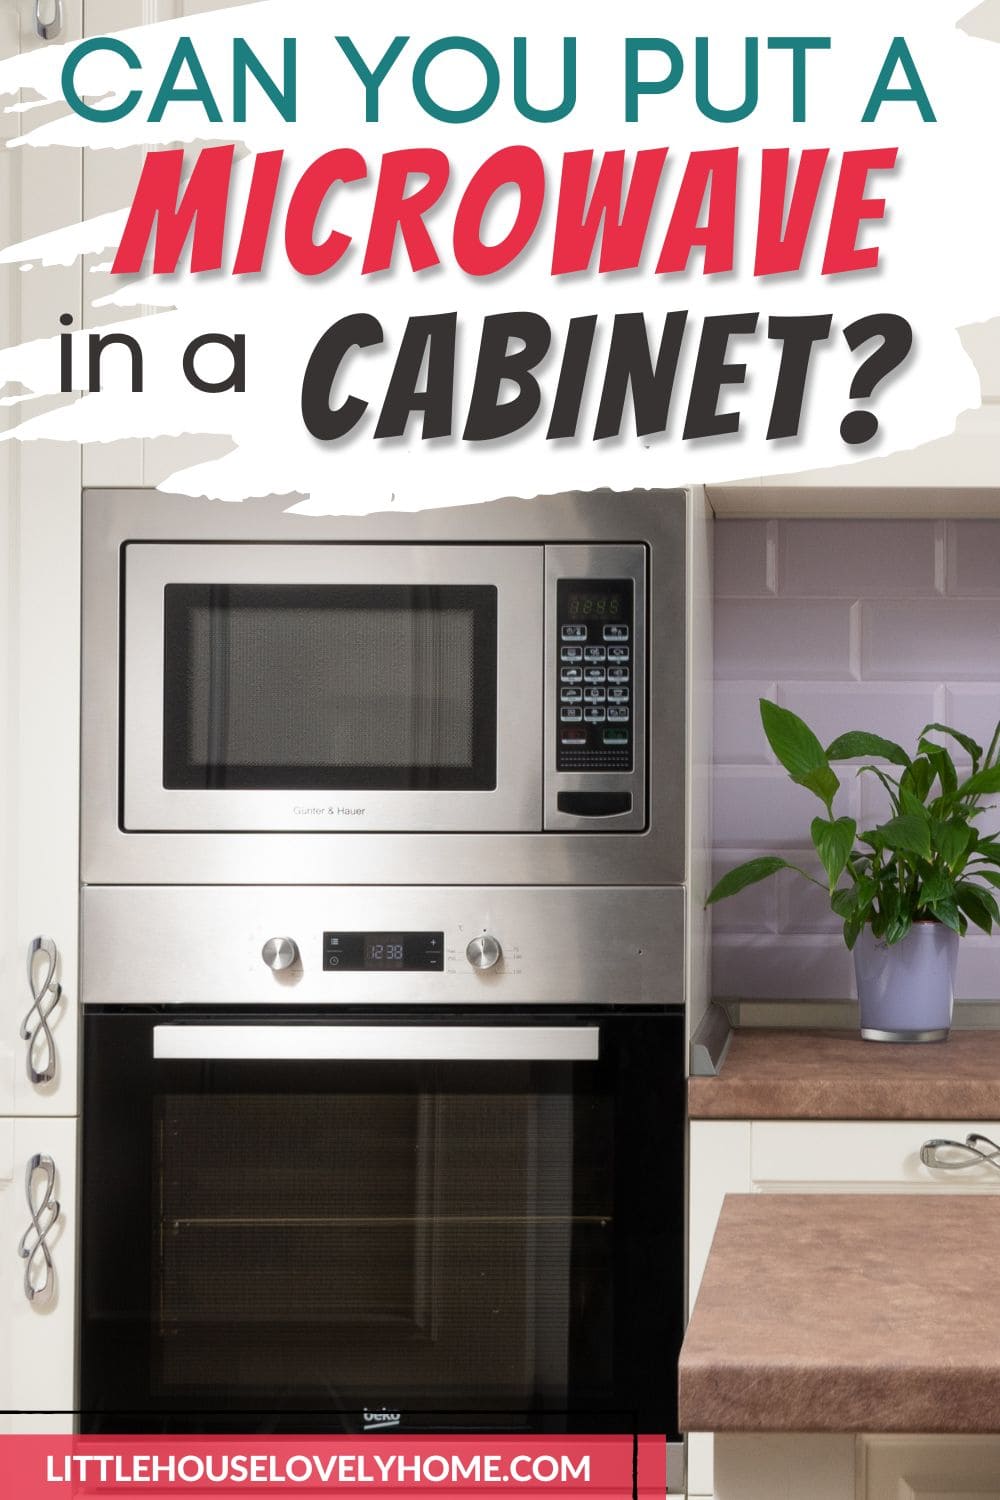 Image showing a microwave oven installed in a cabinet with an oven underneath it with a potted plant on a kitchen countertop and text overlay that reads Can You Put a Microwave in a Cabinet